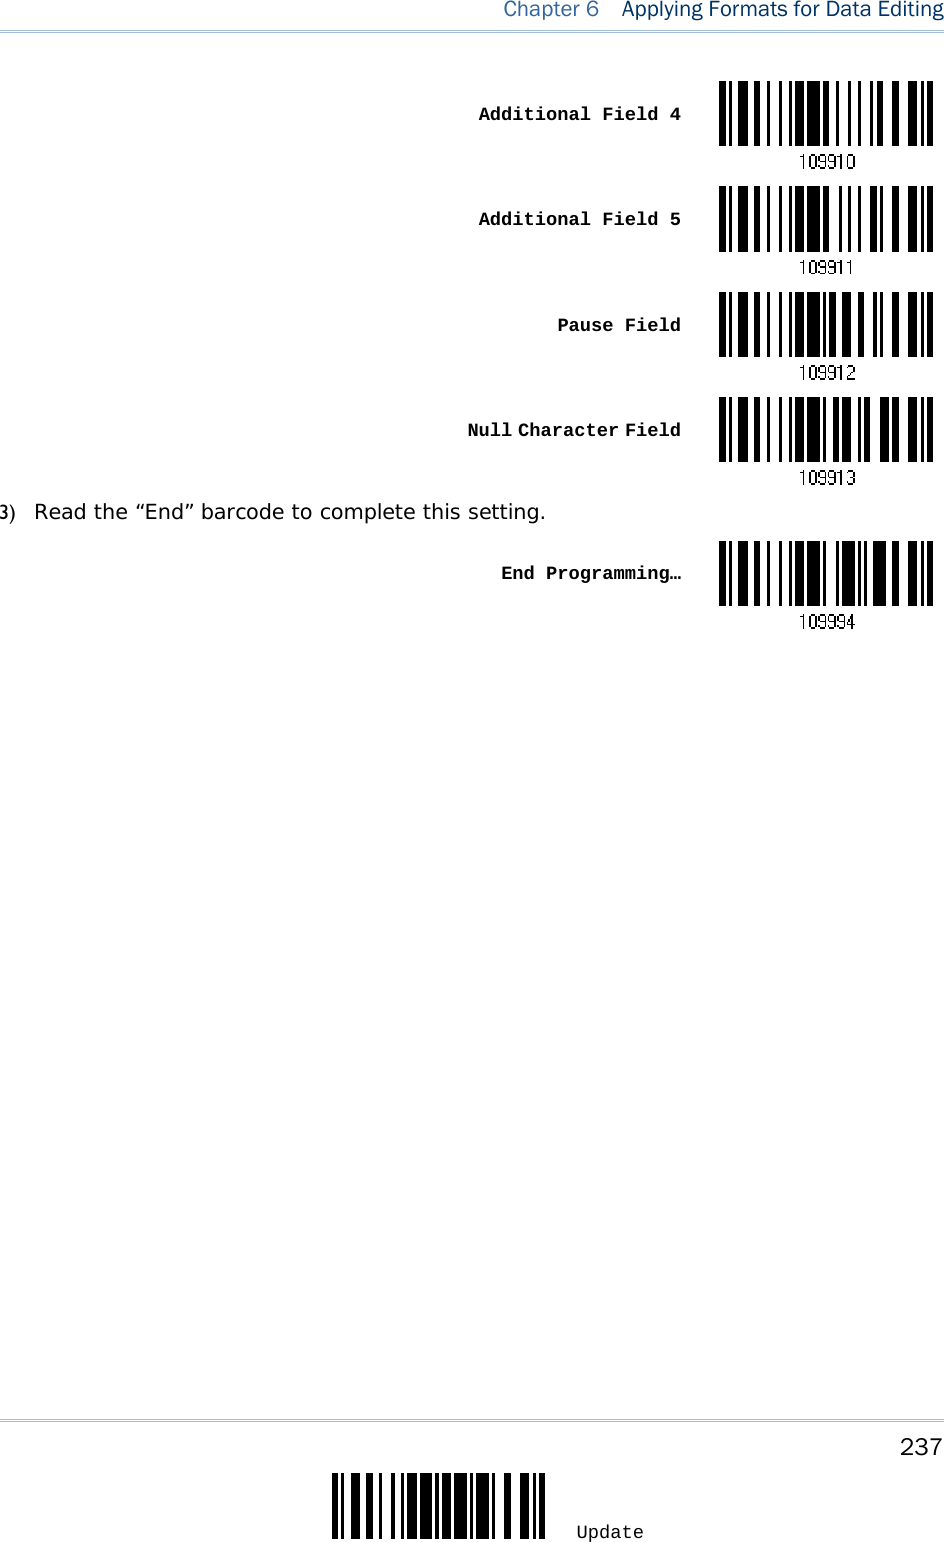     237 Update  Chapter 6  Applying Formats for Data Editing  Additional Field 4 Additional Field 5 Pause Field Null Character Field3) Read the “End” barcode to complete this setting.  End Programming…   